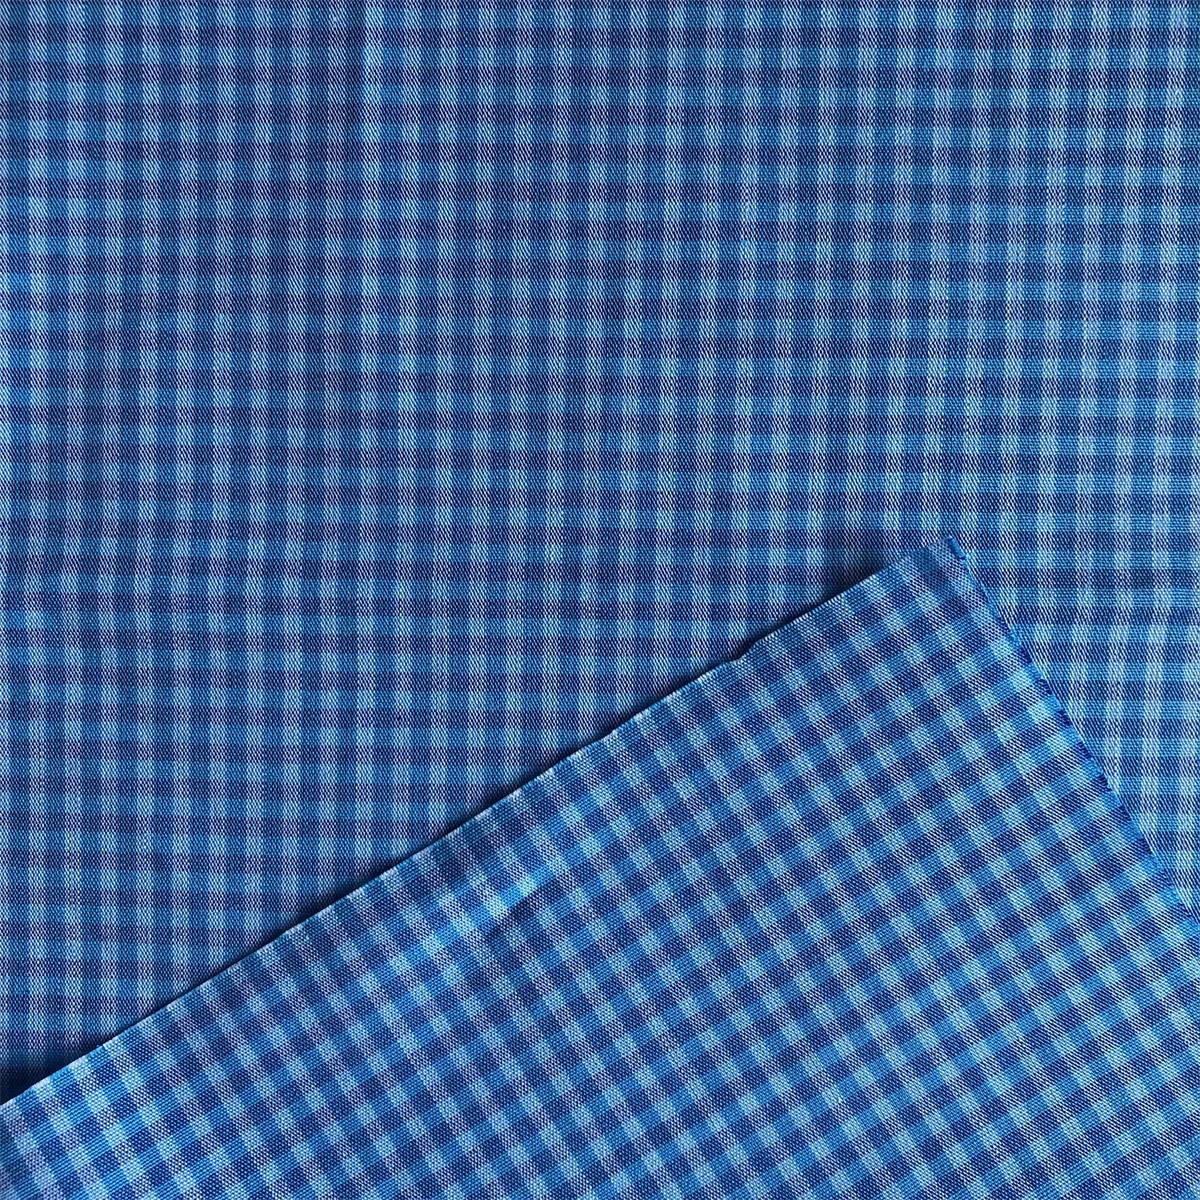 Cotton Yarn Dyed Fabric by compact yarn 100% cotton yarn dyed classic plaid shirts woven fabric for men's casual shirts